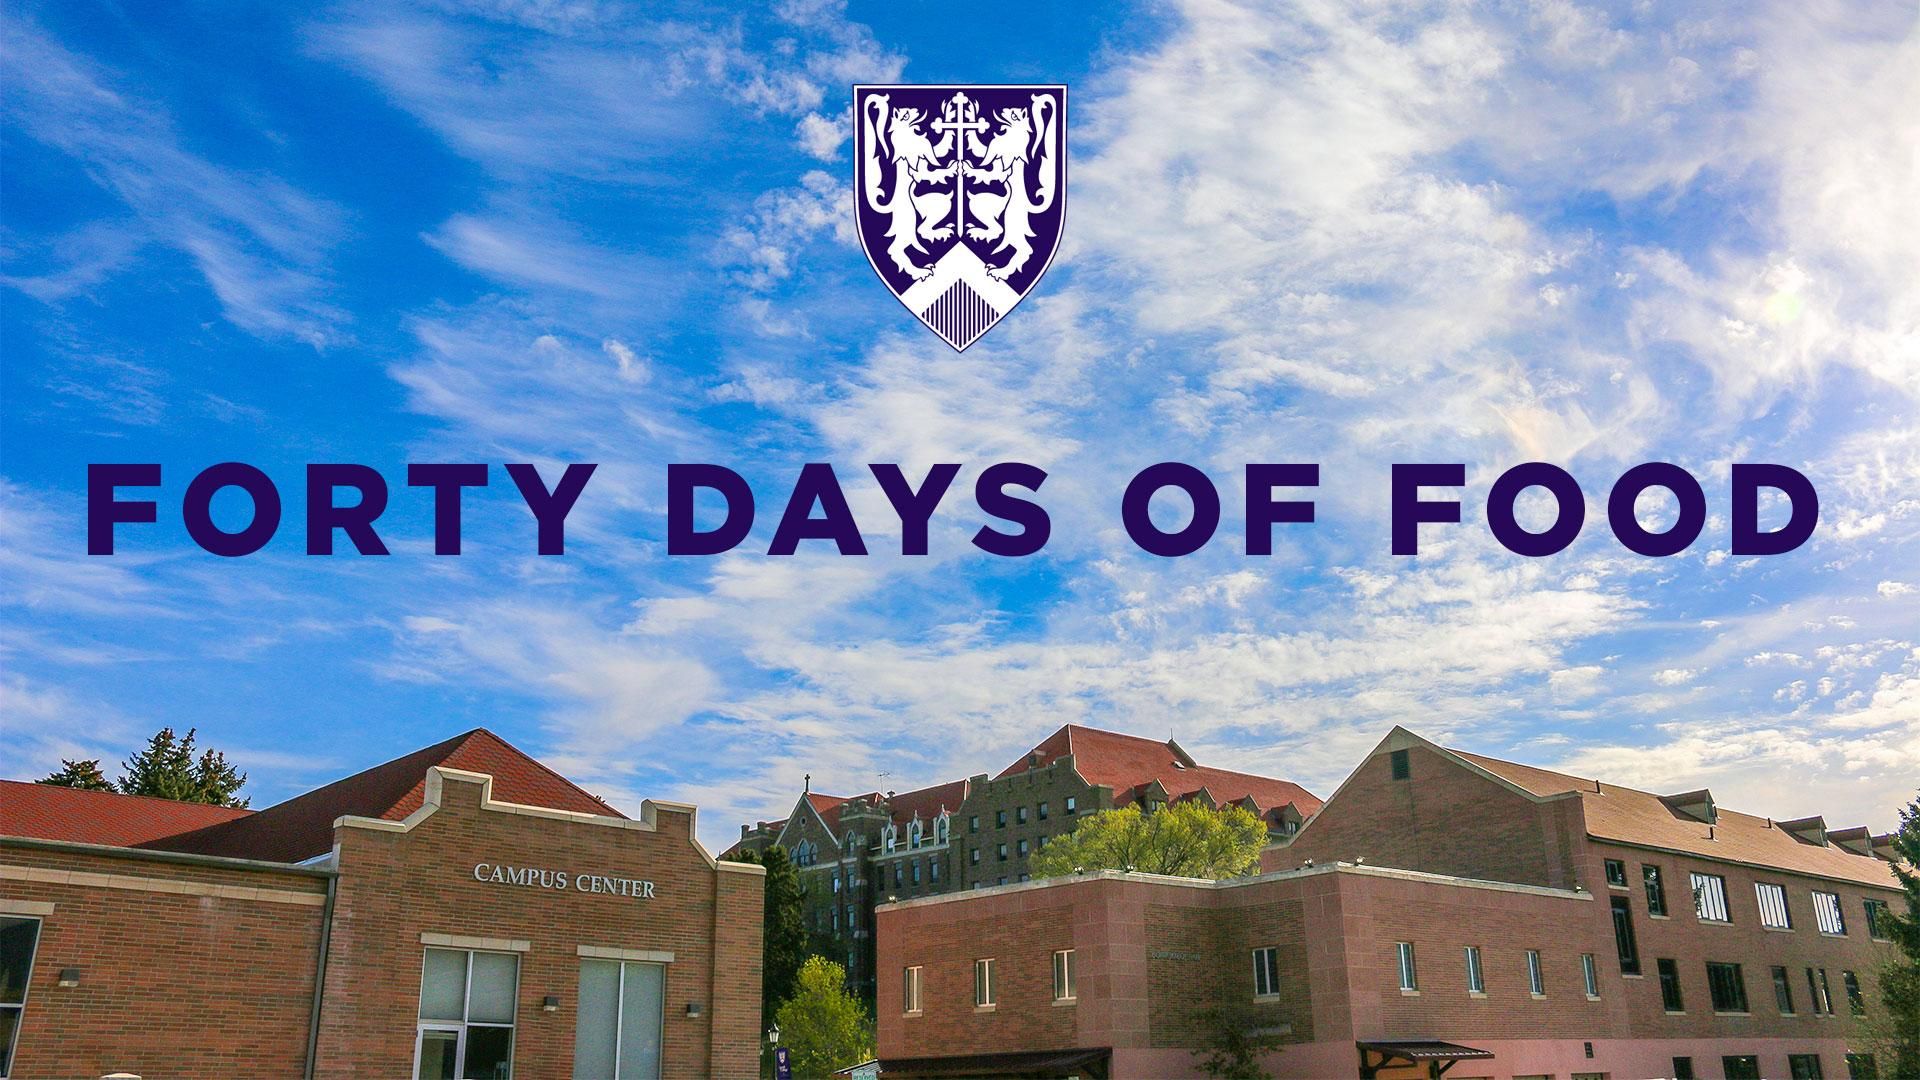 Students Support Helena Food Share with 'Forty Days of Food' Program graphic